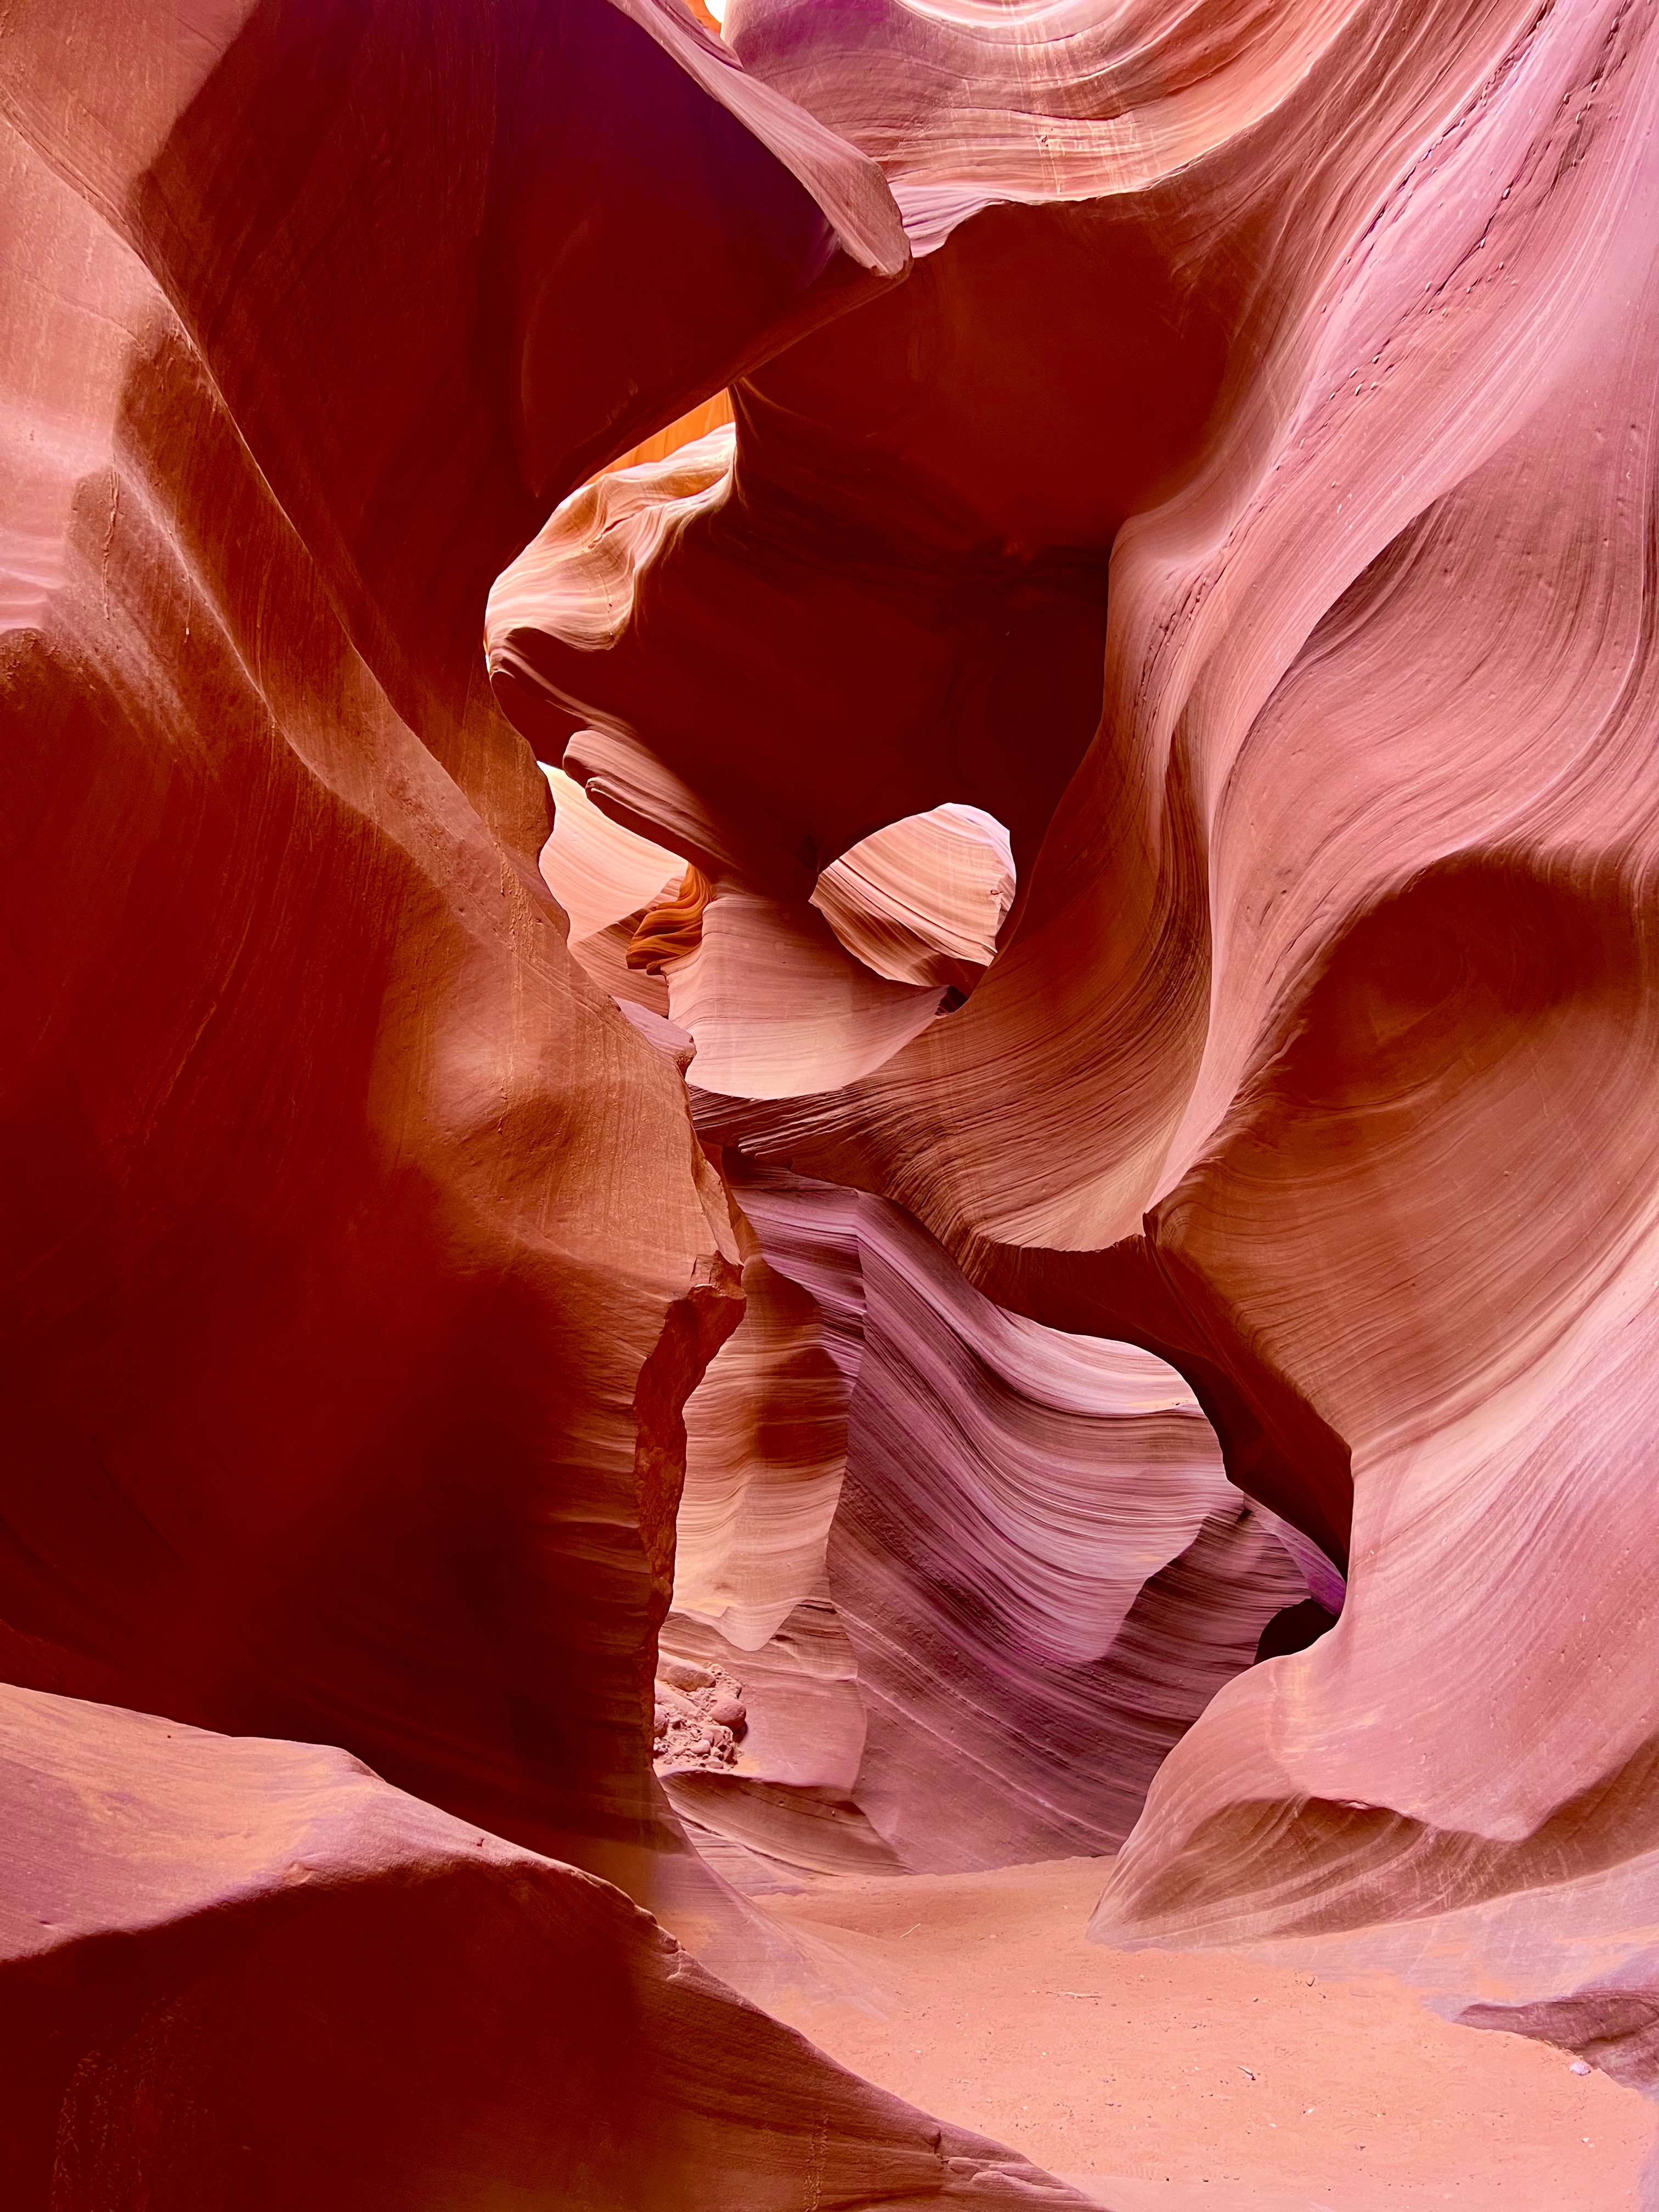 A picture of antelope canyon in the desert.